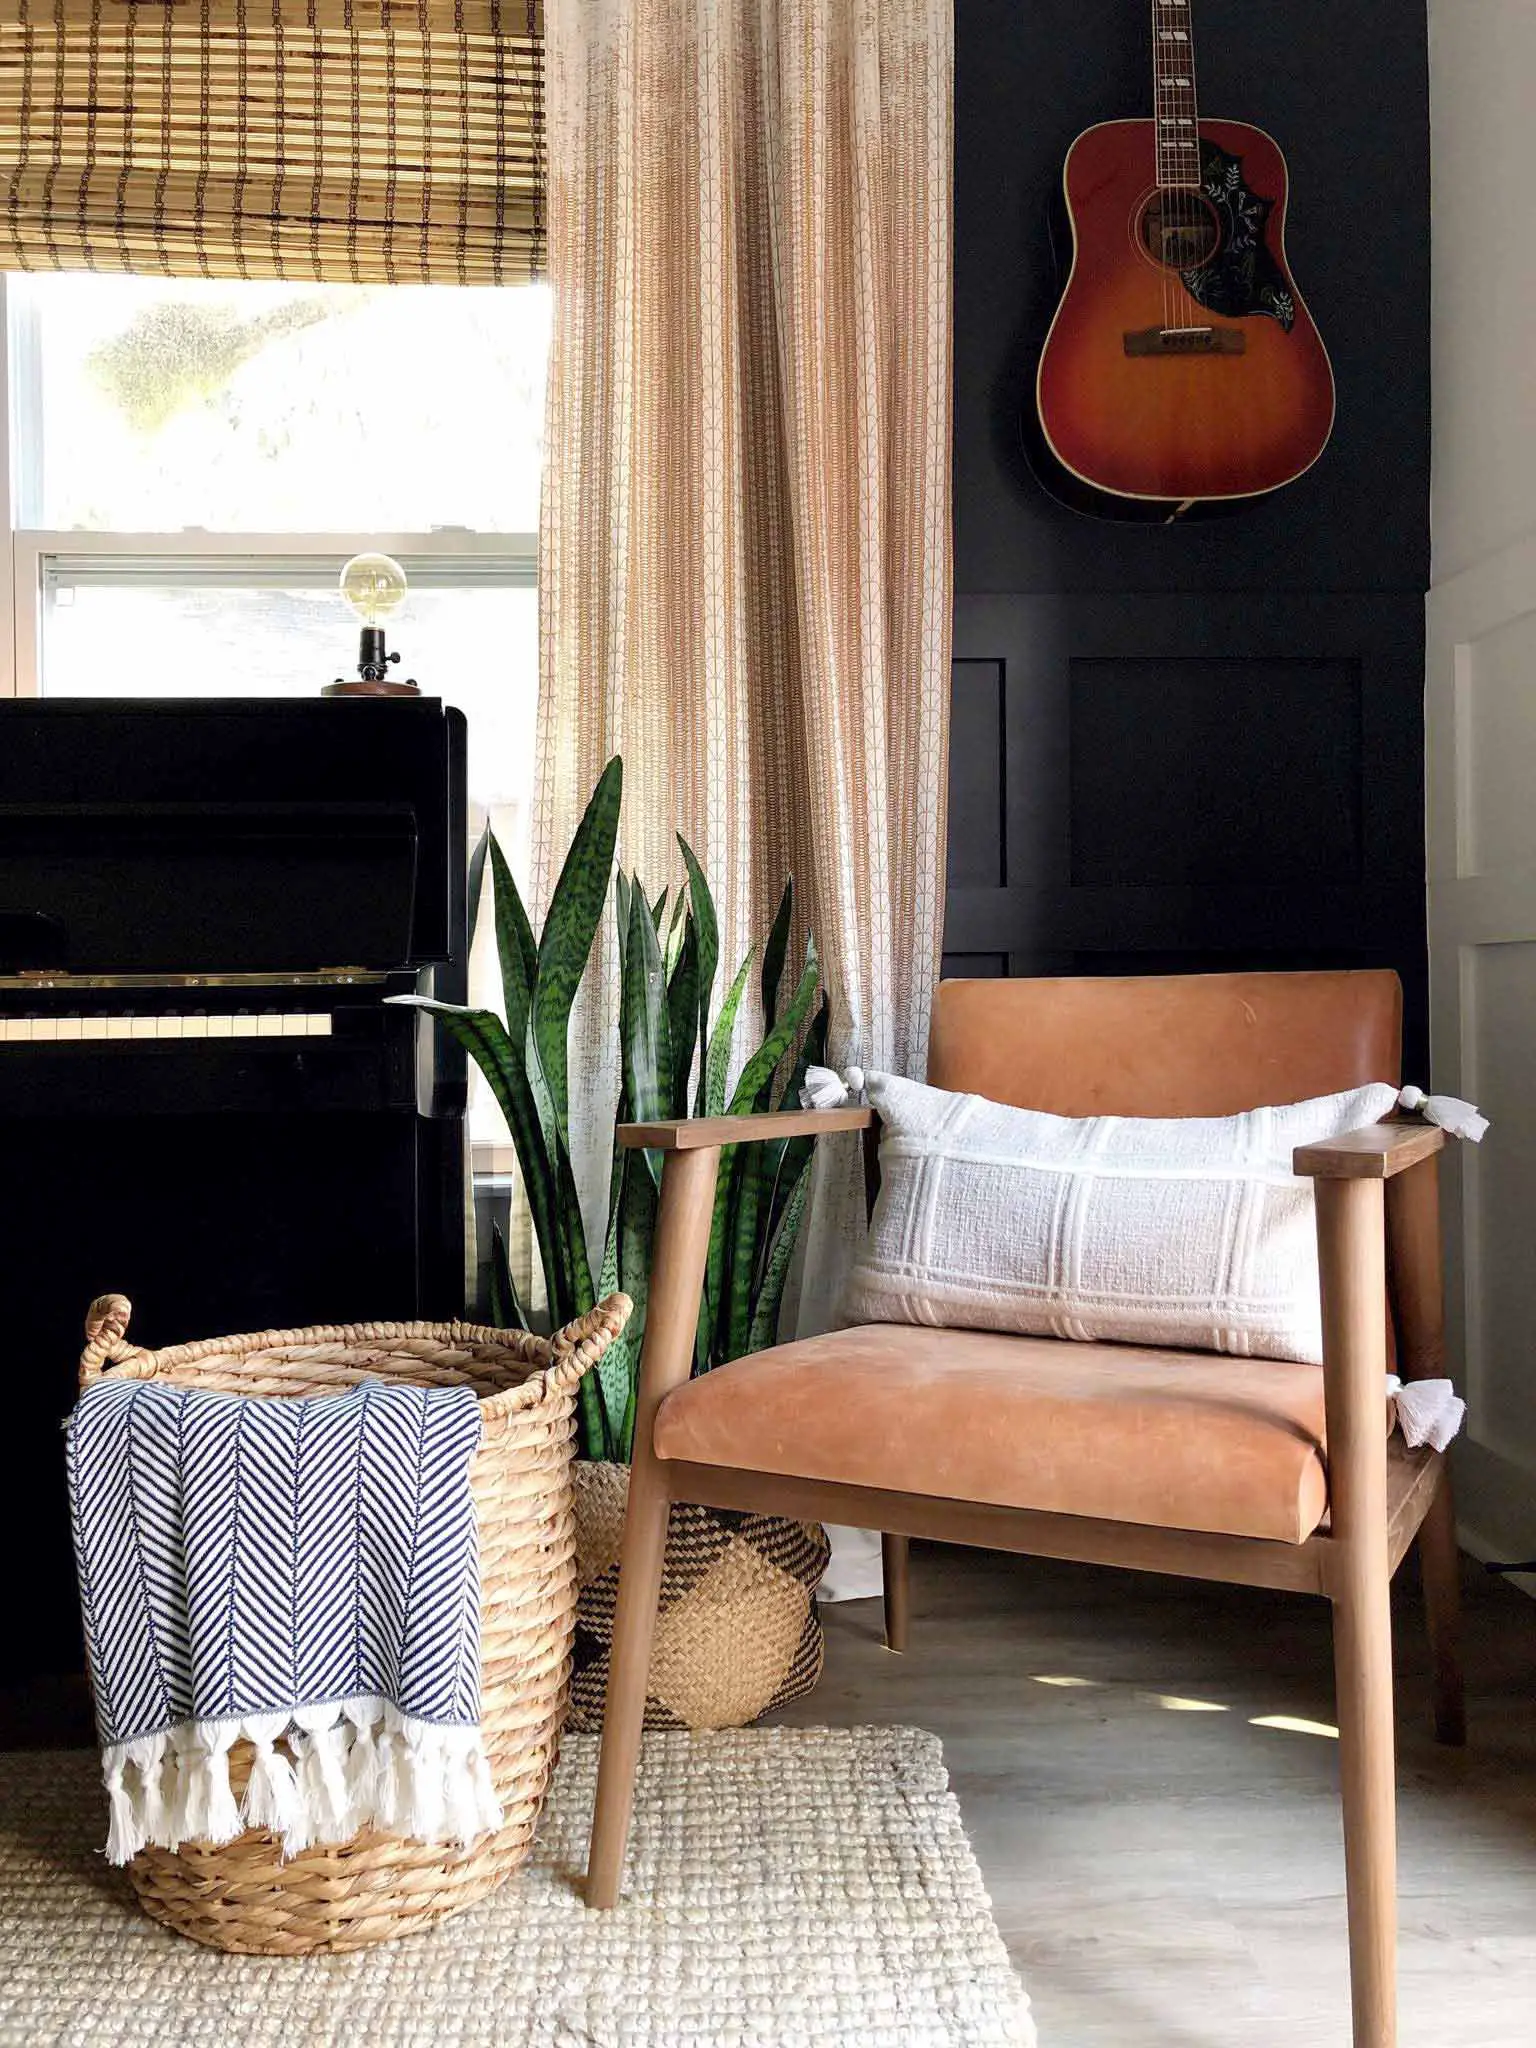 chair in corner with guitar on the wall